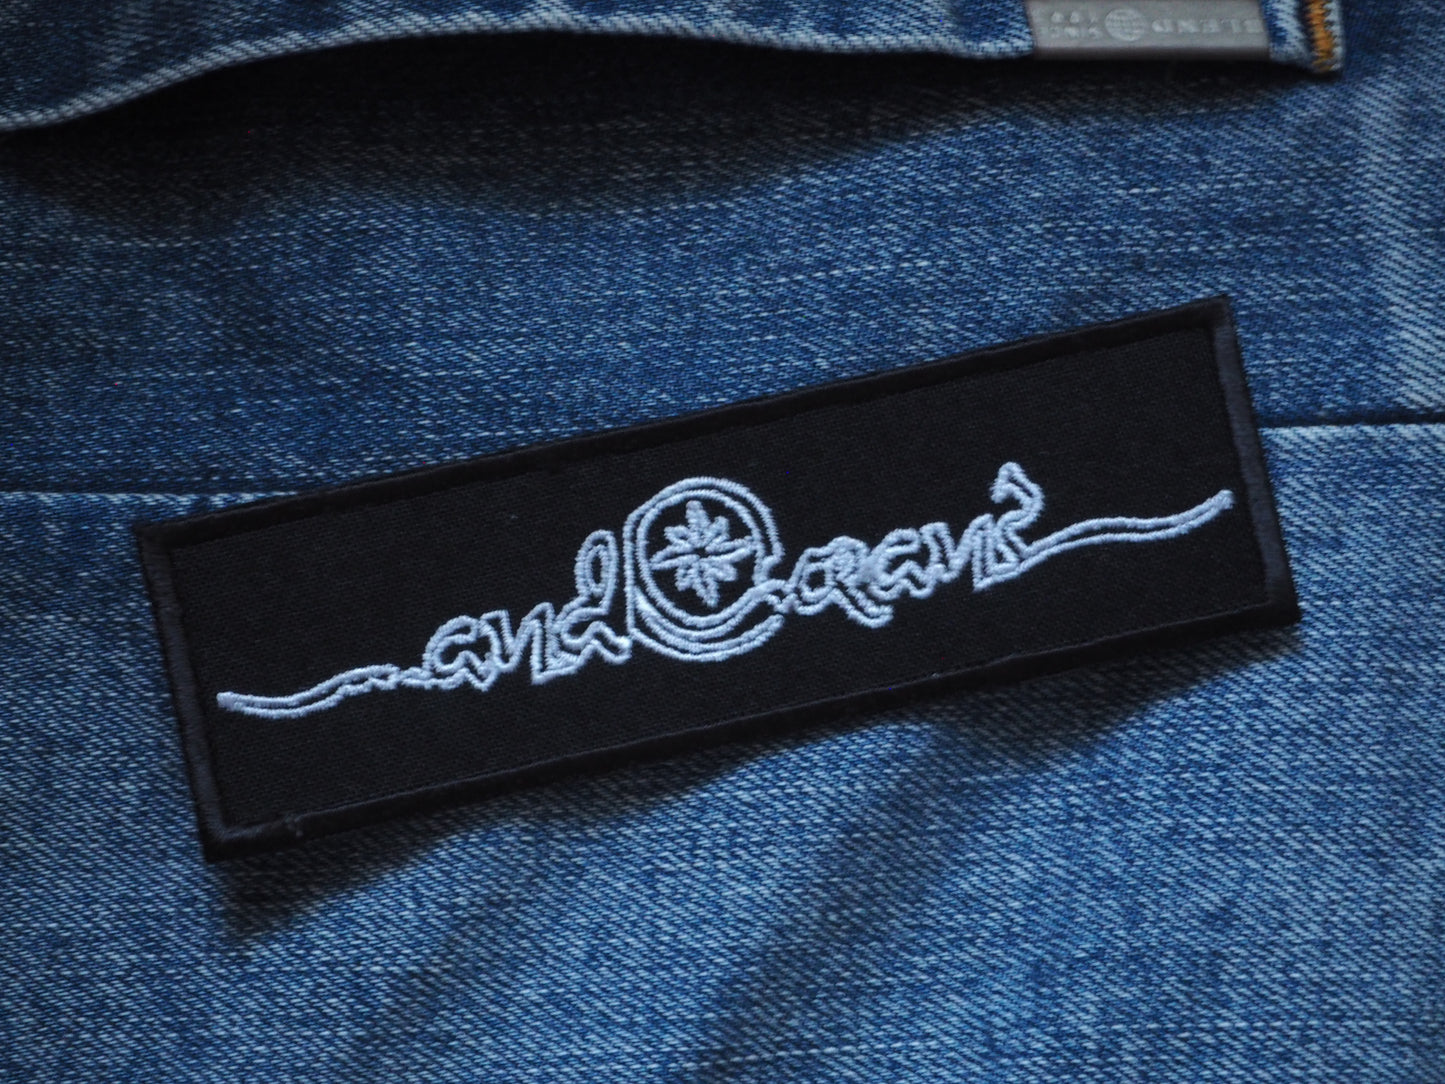 And Oceans Black Metal Embroidered Patch – IngridPatches